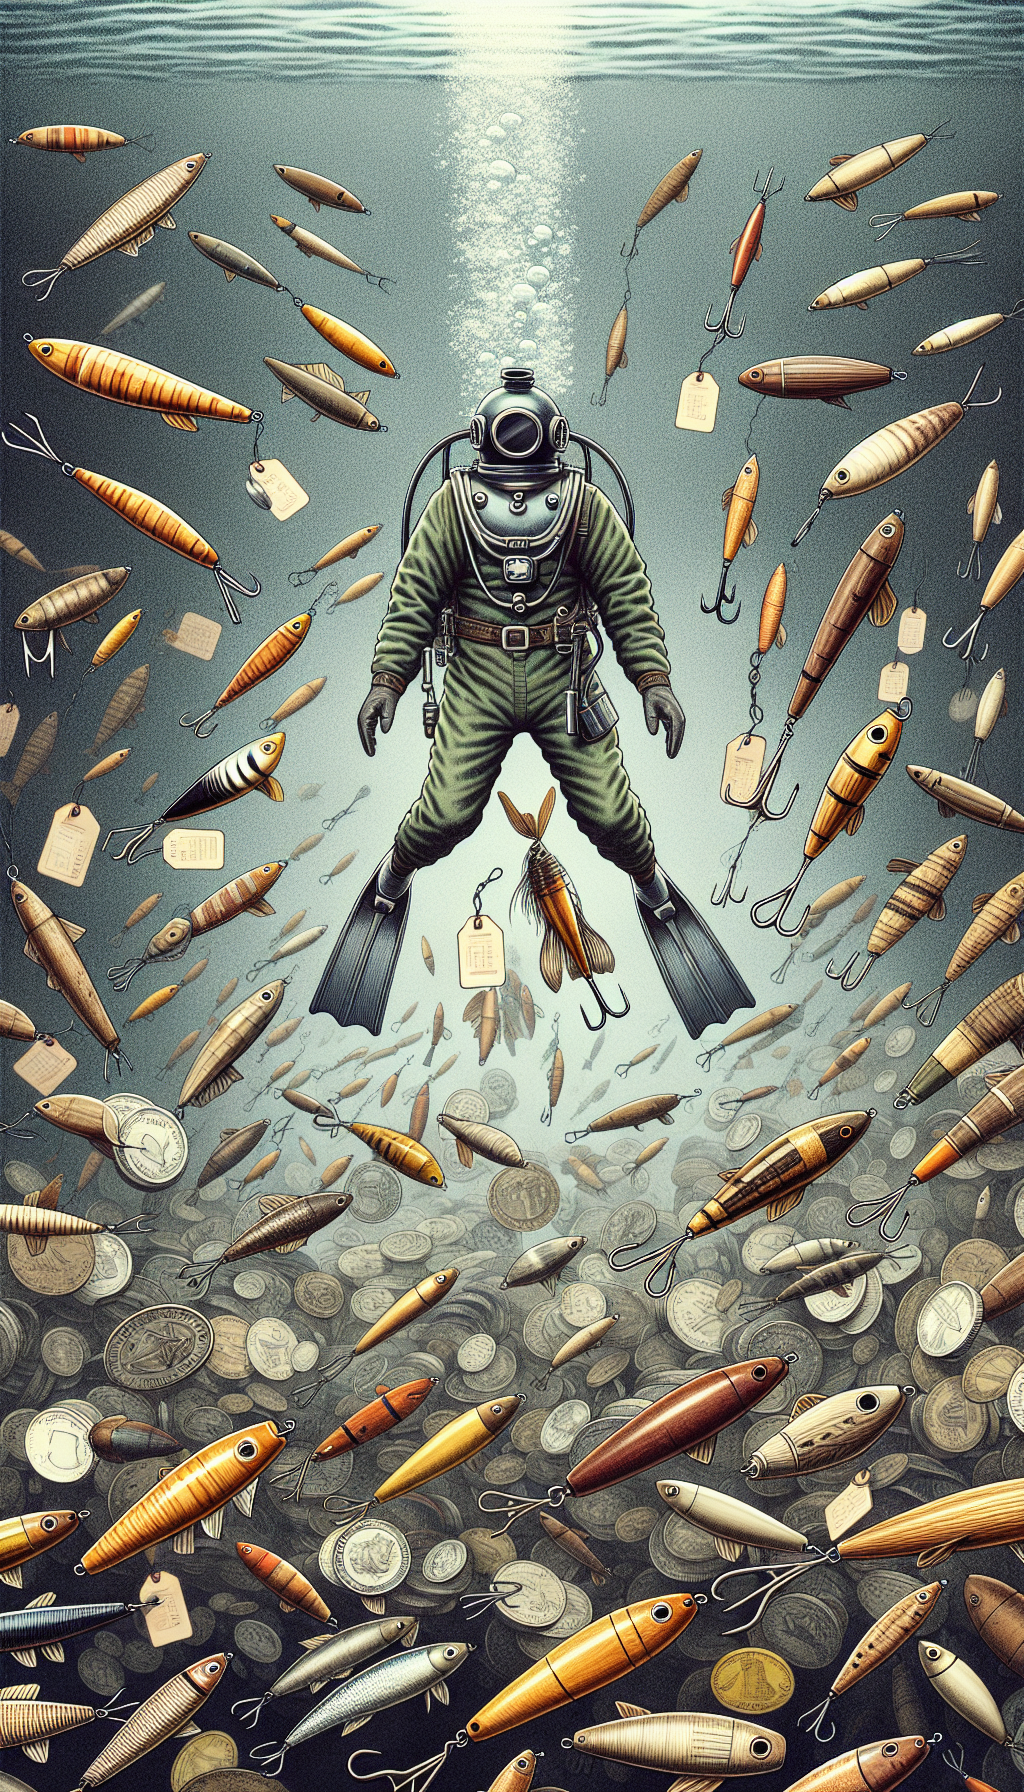 An illustration depicts a vintage diver, encased in an old-fashioned diving suit, submerging into a sea of wooden lures spanning different eras. The lures below morph into coins and bills, with price tags dangling from them, suggesting their increasing value. Each lure is stylized differently, with the older ones appearing more worn and the newer ones polished, highlighting their historical evolution.